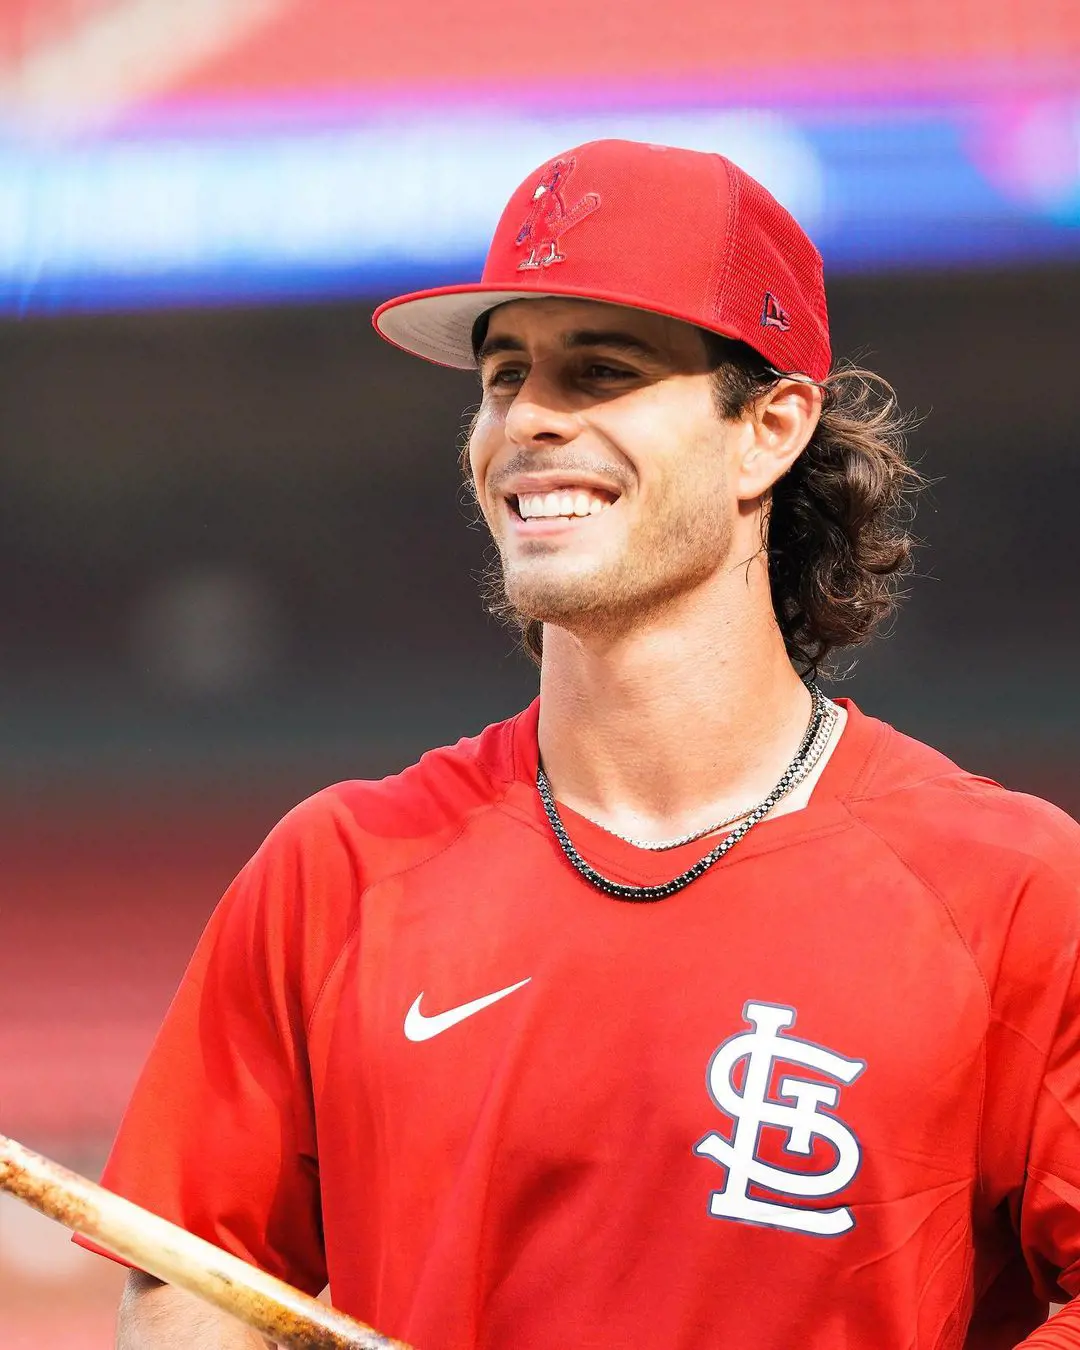 Kramer joined the MLB club St. Louis Cardinals in 2017